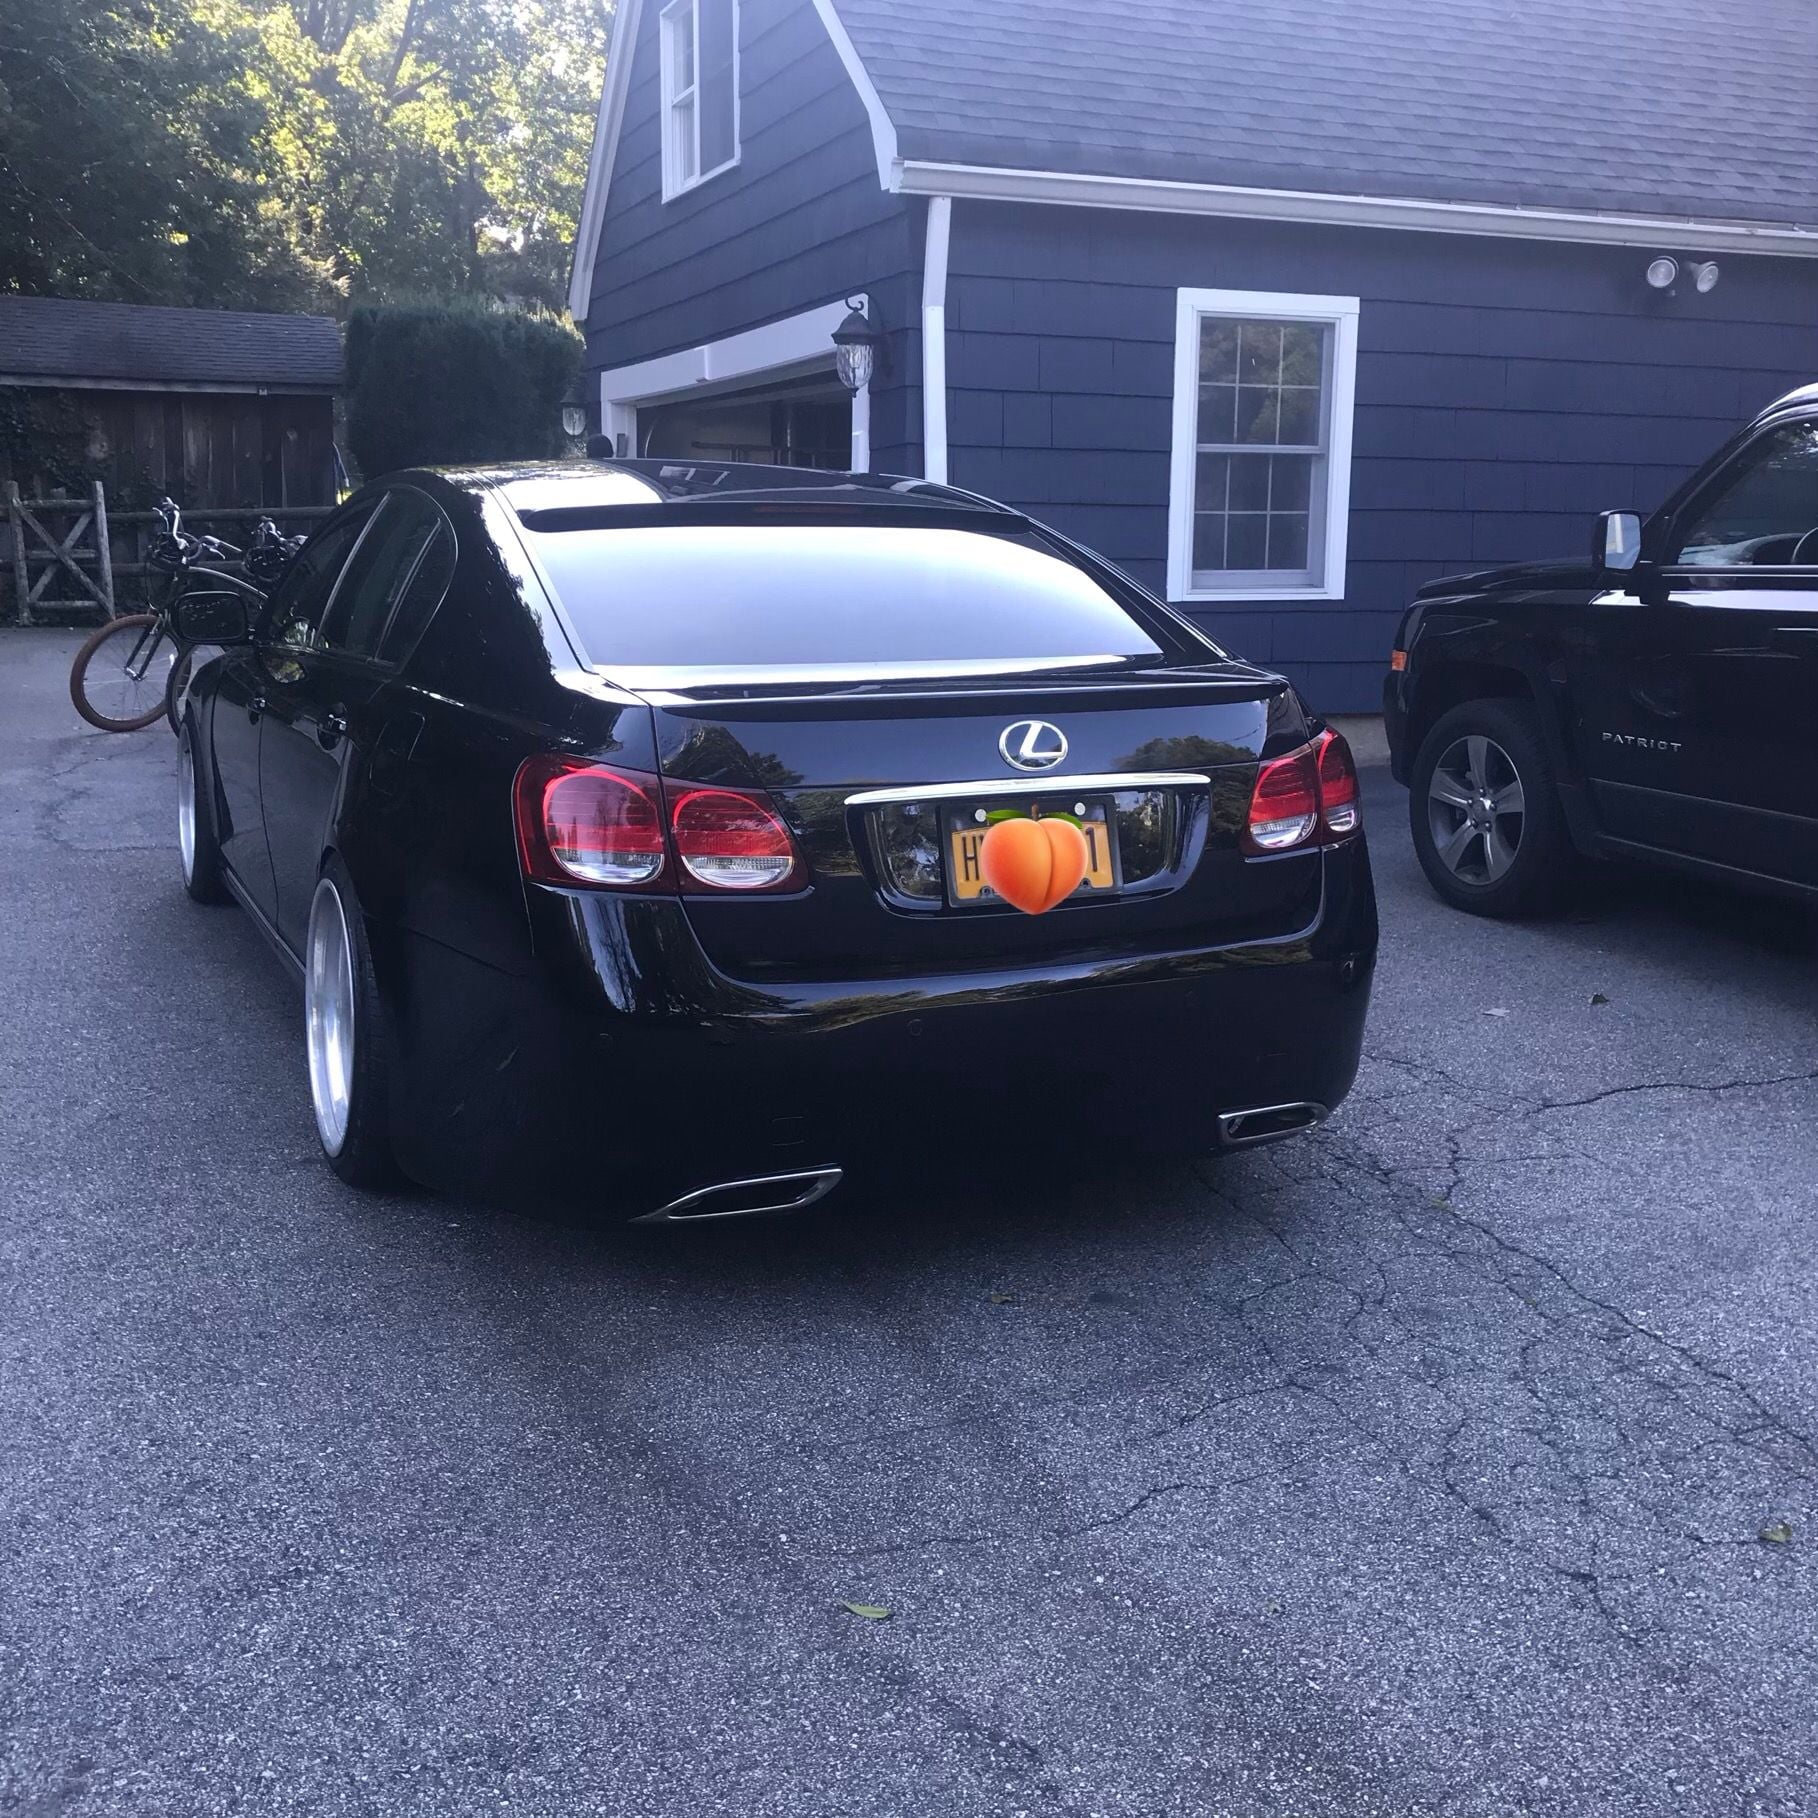 2006 Lexus GS430 - Custom GS430, very well maintained - Used - VIN JTHBN96S165007766 - 115,000 Miles - 8 cyl - 2WD - Automatic - Sedan - Black - White Plains, NY 10604, United States